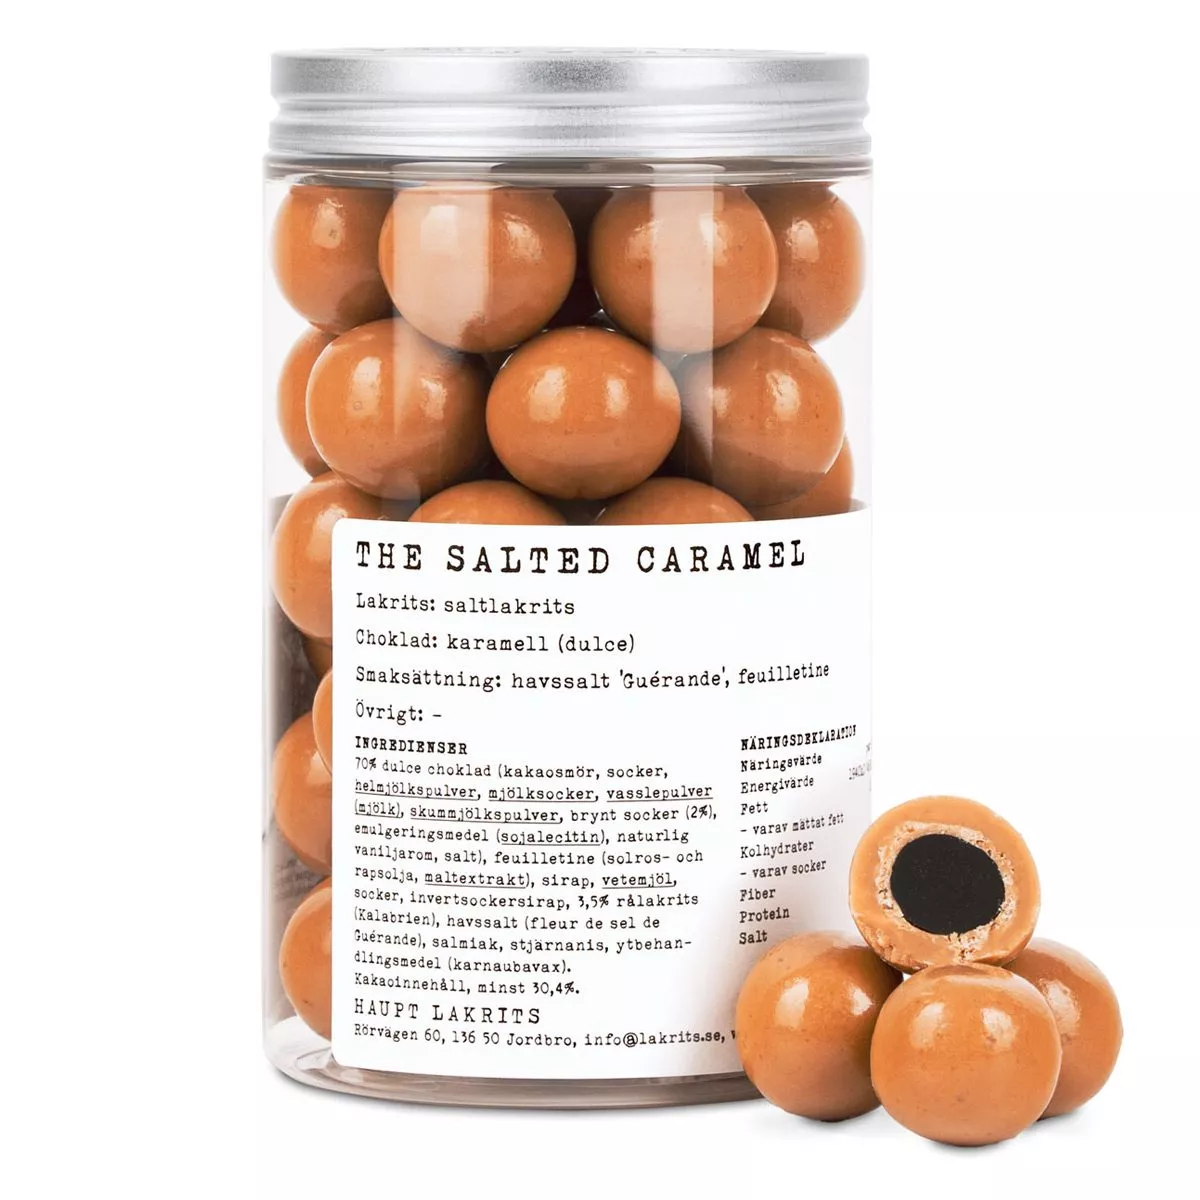 Haupt Lakrits The Salted Caramel (250g) 1